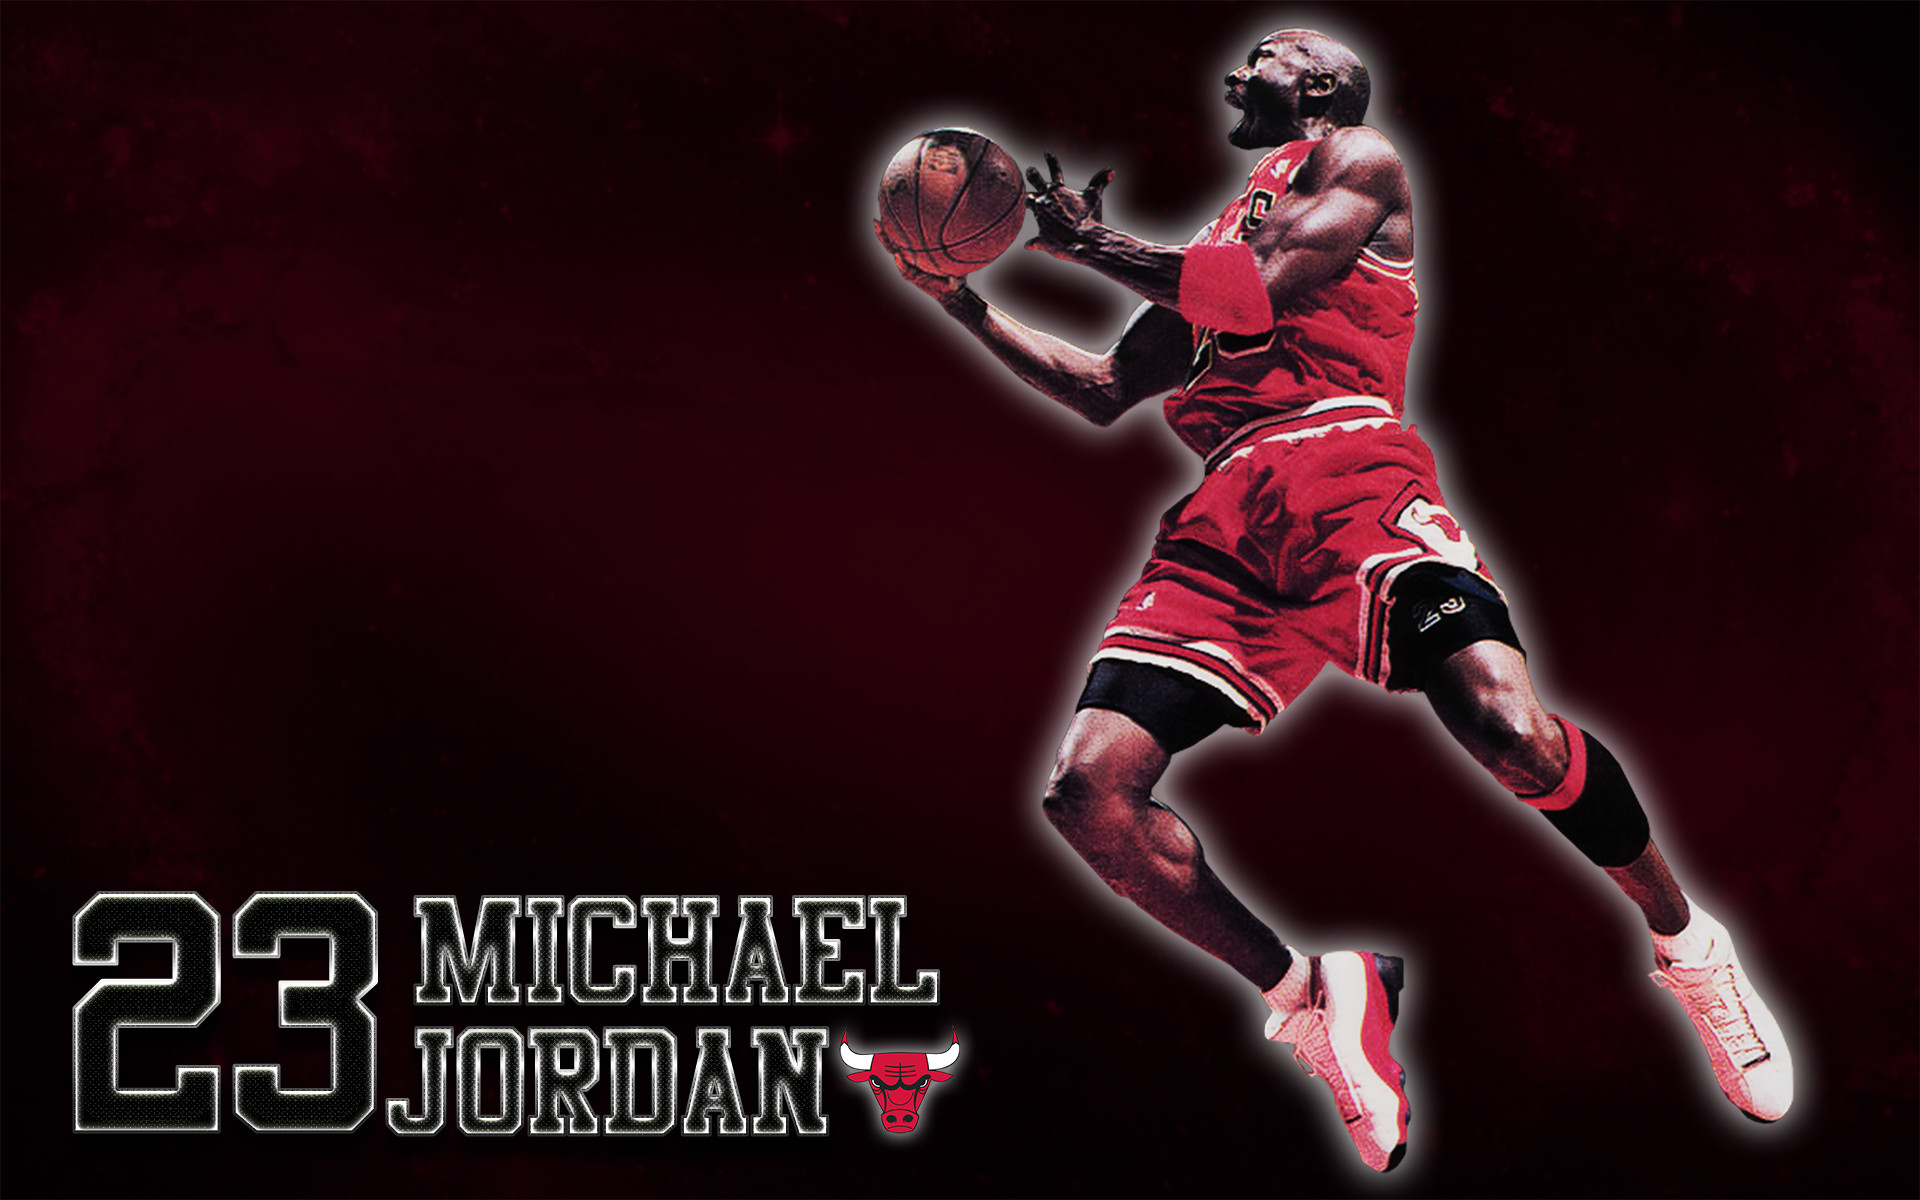 1920x1200 Awesome Chicago Bulls wallpaper | Chicago Bulls wallpapers